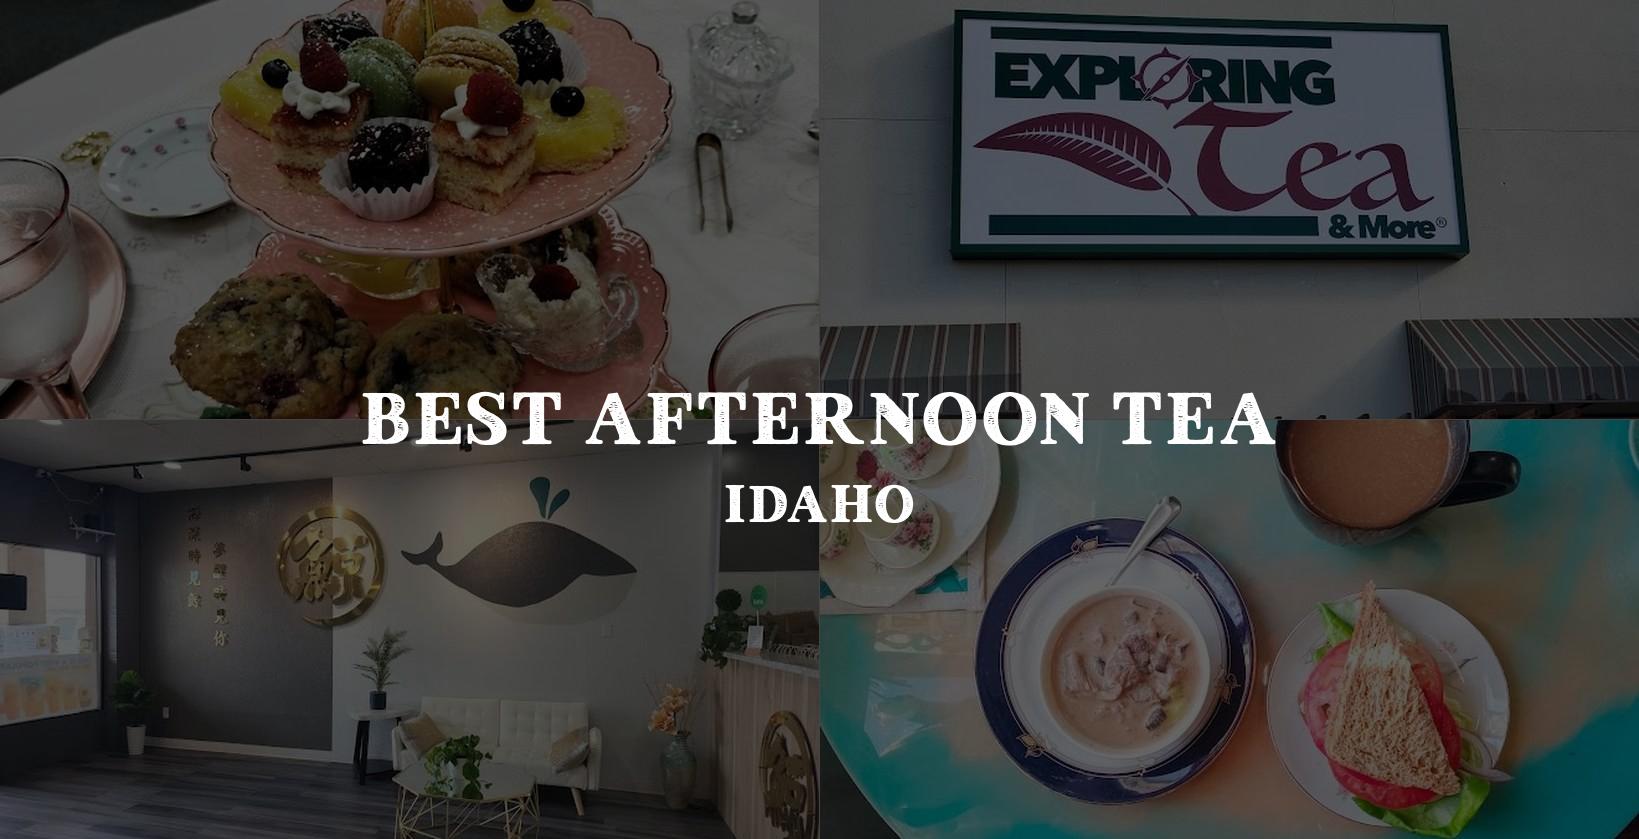 Choosing the perfect spot for afternoon tea in Idaho